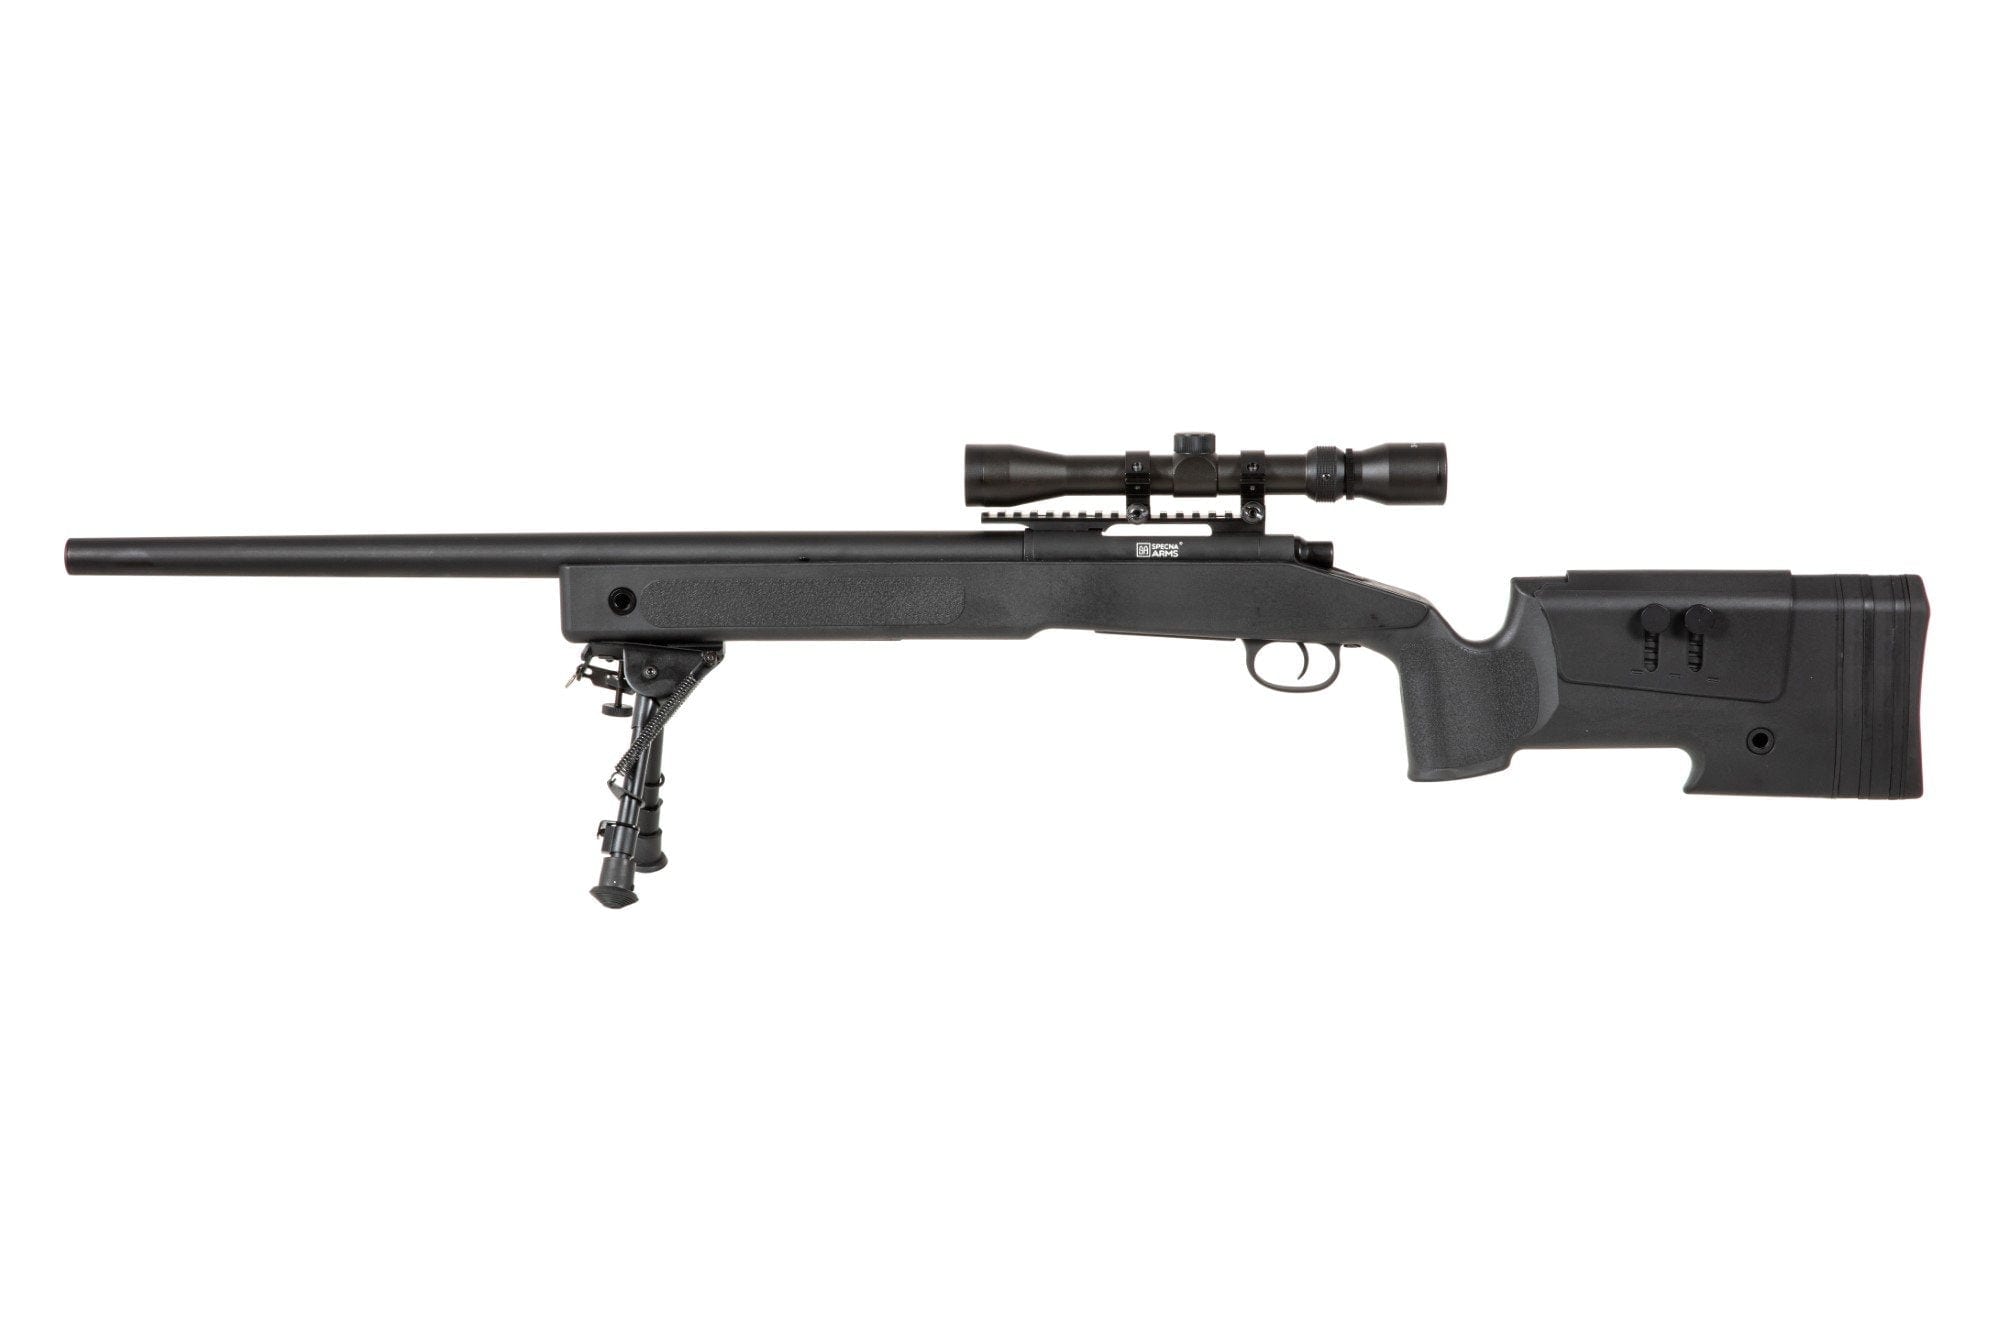 SA-CORE ™ S02 replica sniper rifle with scope and bipod - black by Specna Arms on Airsoft Mania Europe